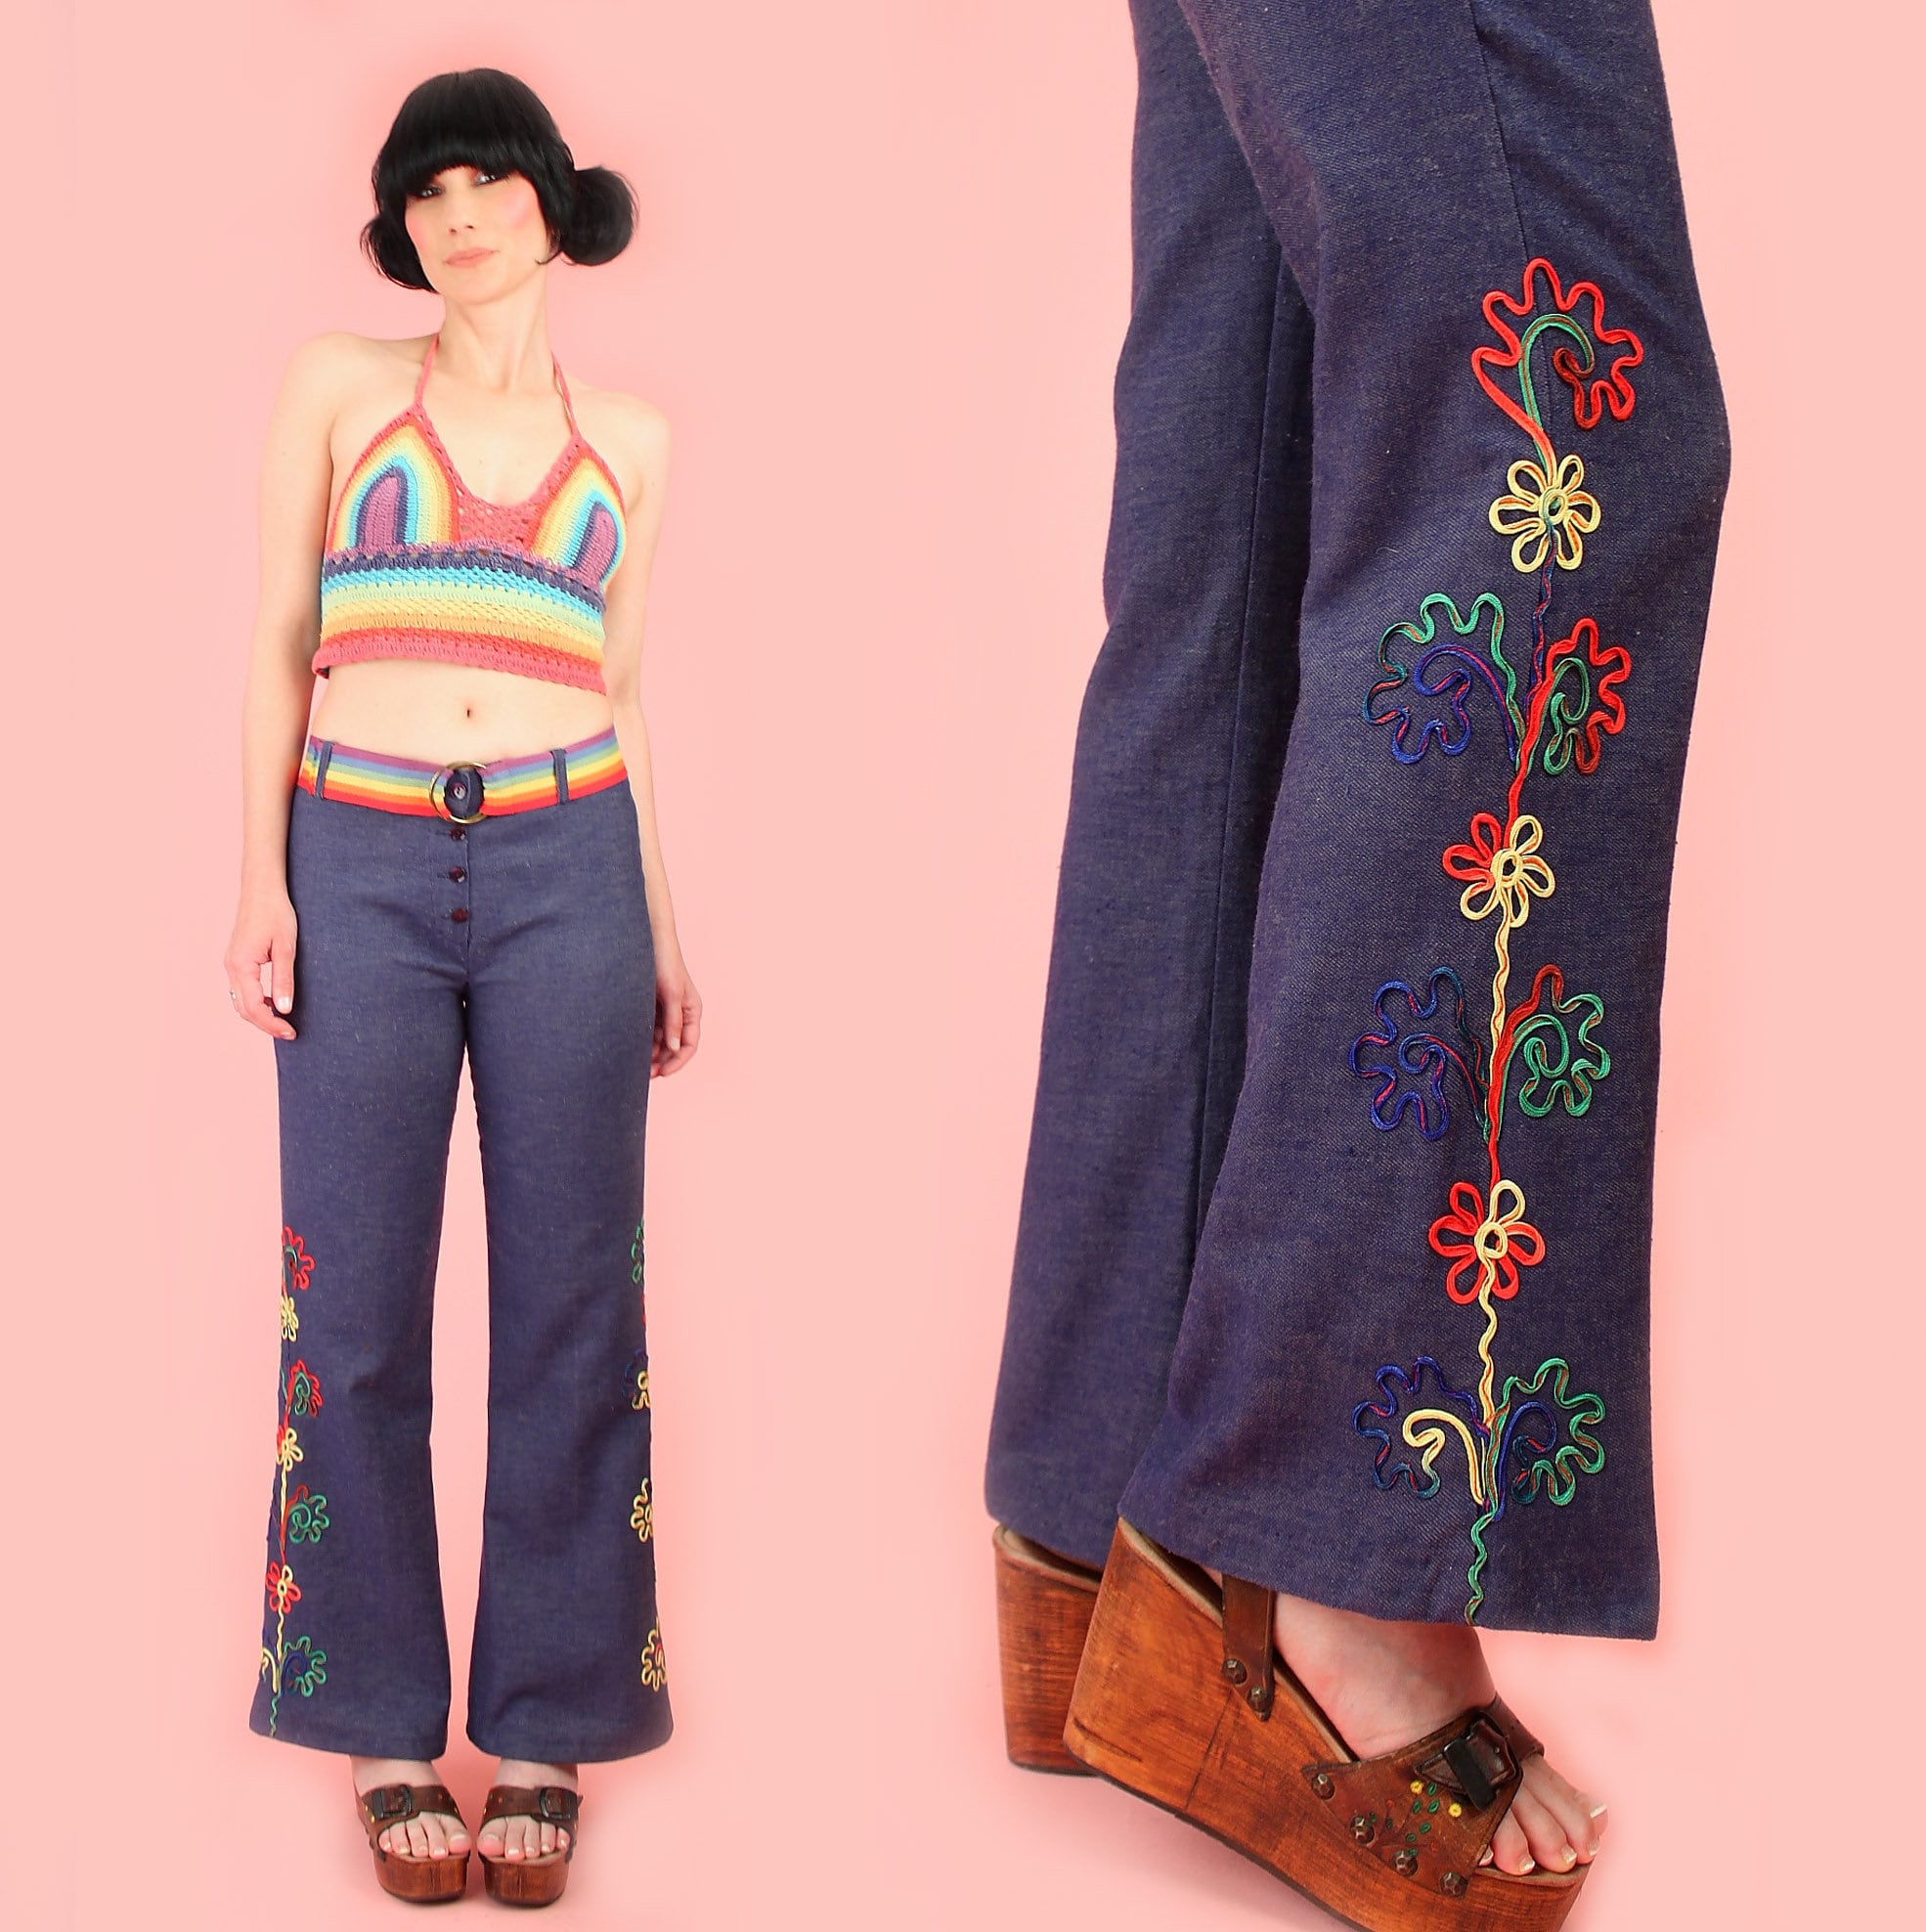 Vintage Embroidered Floral Jeans, Blue Embroidered Denim Pants, Handmade  Boho Jeans, Summer Cropped Pants, Soft Cotton Jeans, Gift for Her 